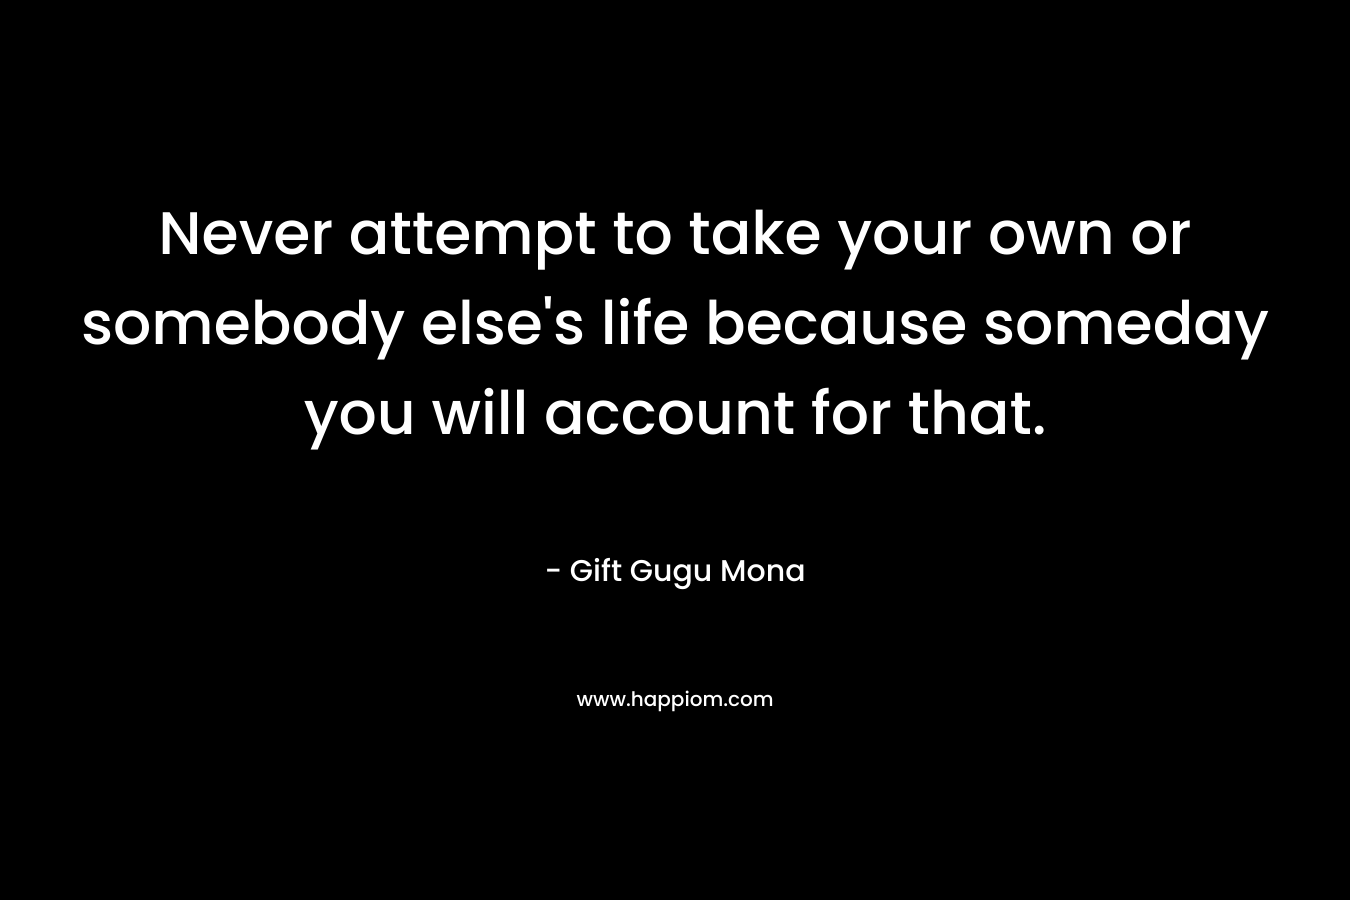 Never attempt to take your own or somebody else's life because someday you will account for that.